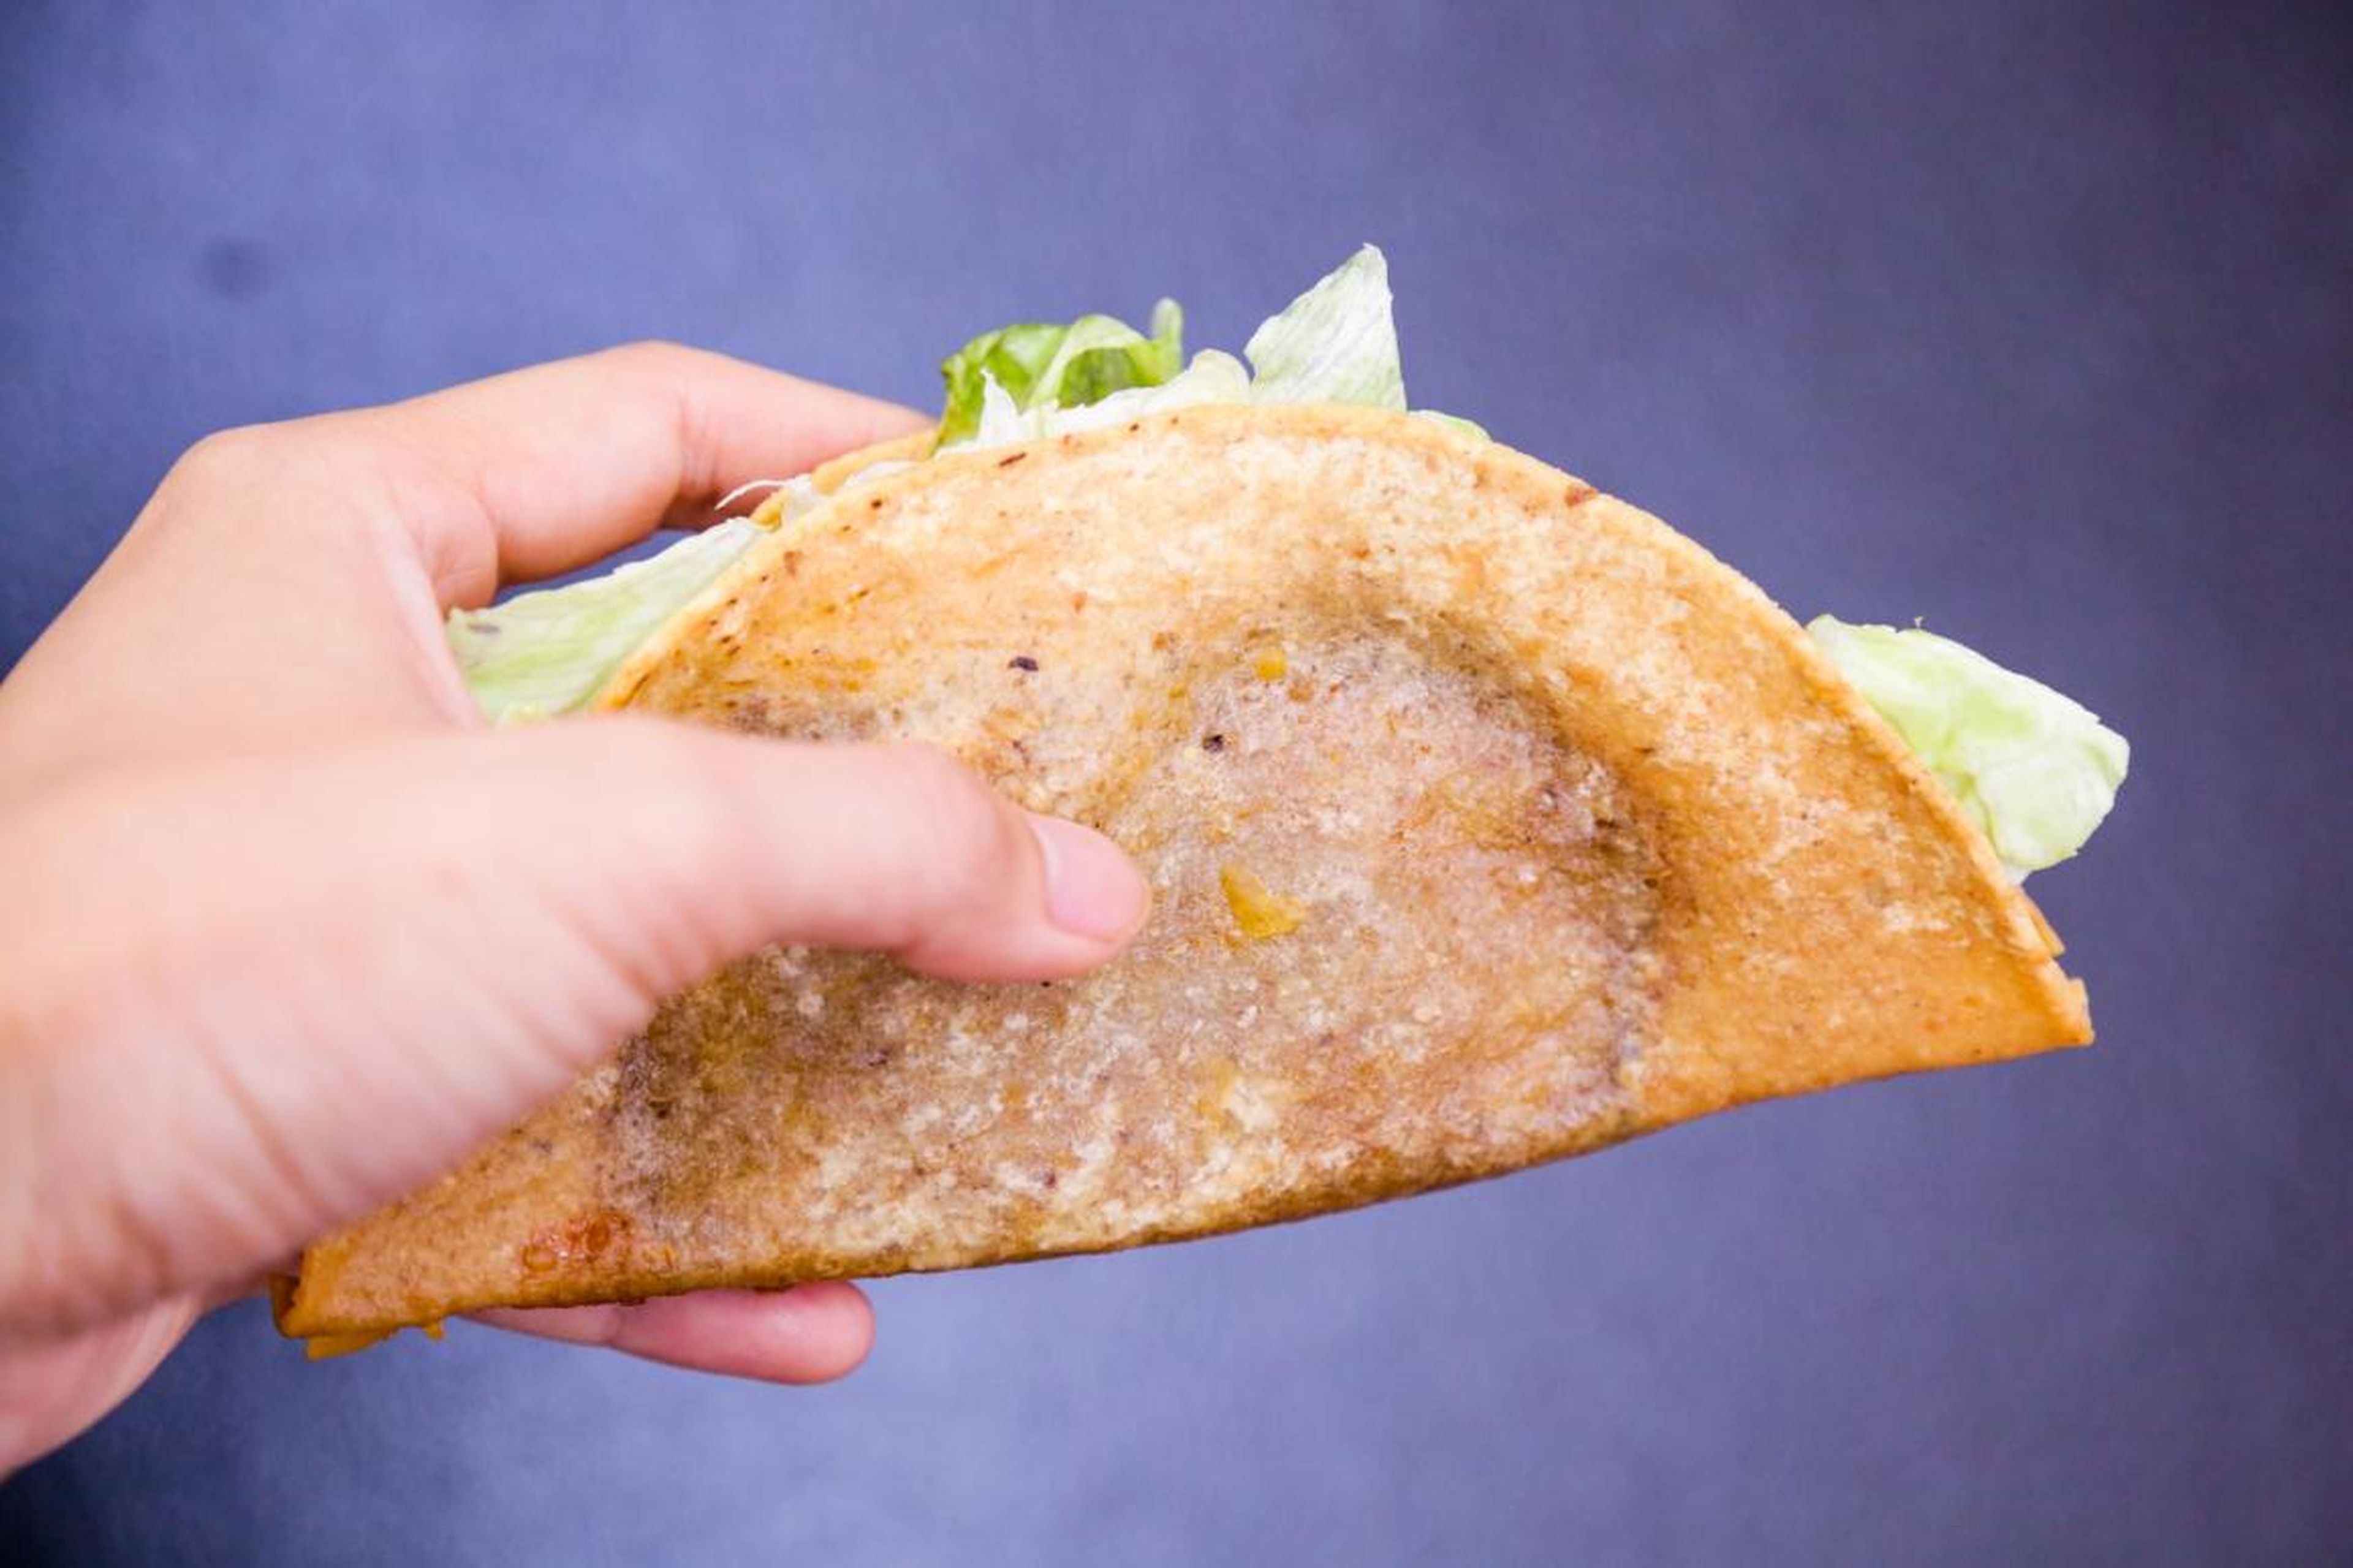 The shell was far from golden, and it clung lopsidedly to the filling. Floppy bits of lettuce struggled to escape from the tortilla's iron clutches. The shell was crispy, but it was borderline overcooked and drowning in grease.